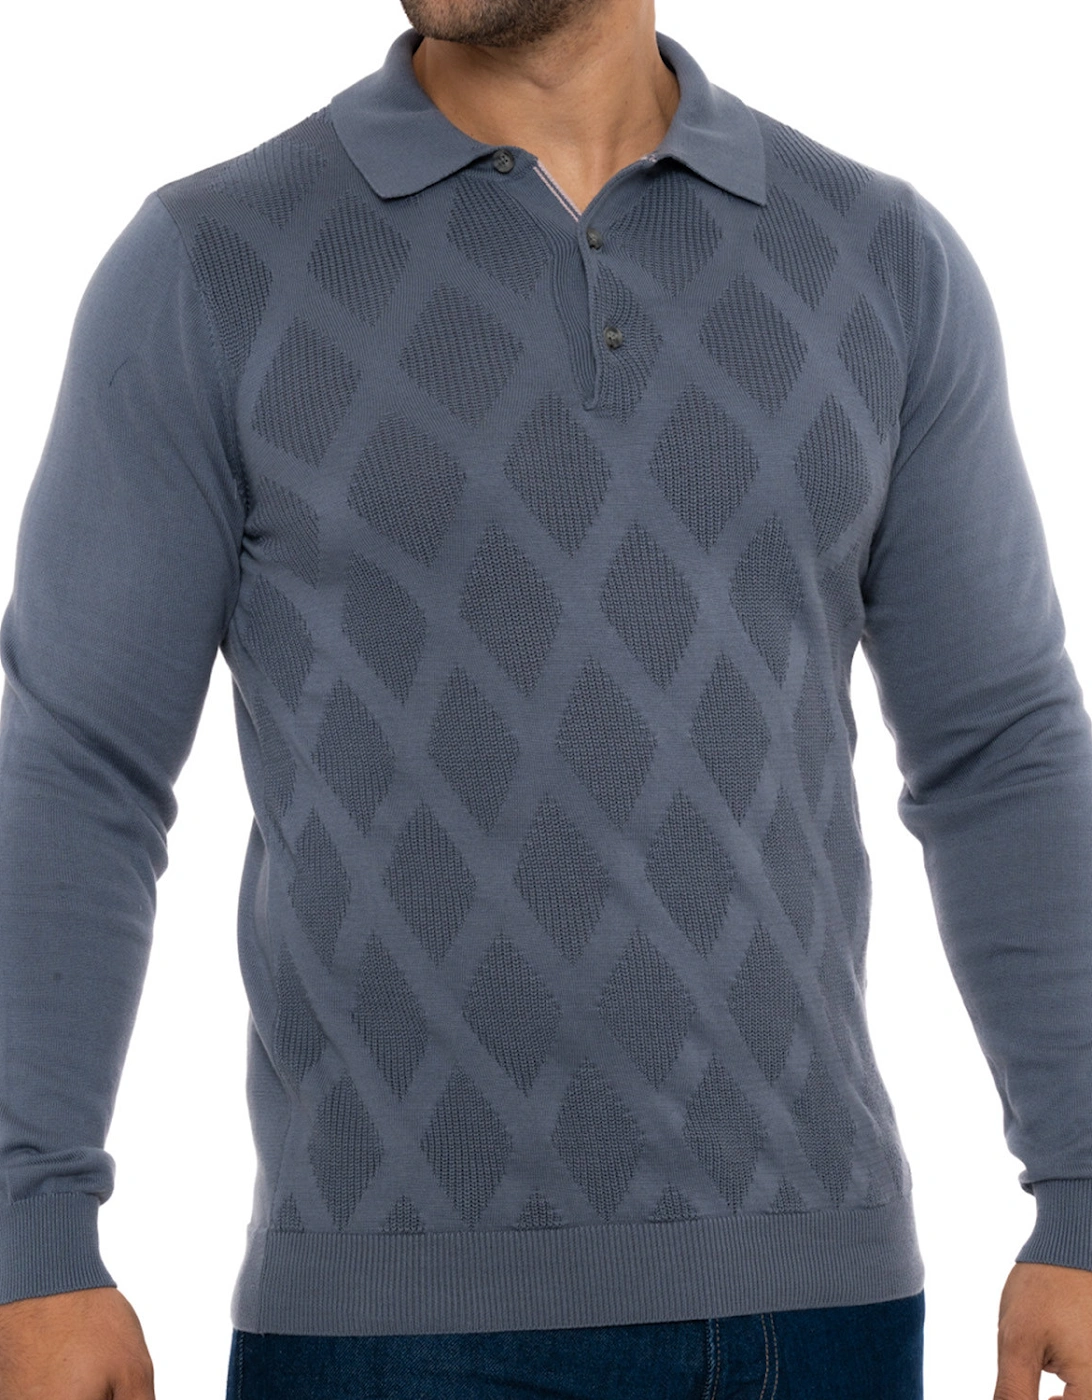 Mens Self Pattern Knitted Polo Shirt (Steel)